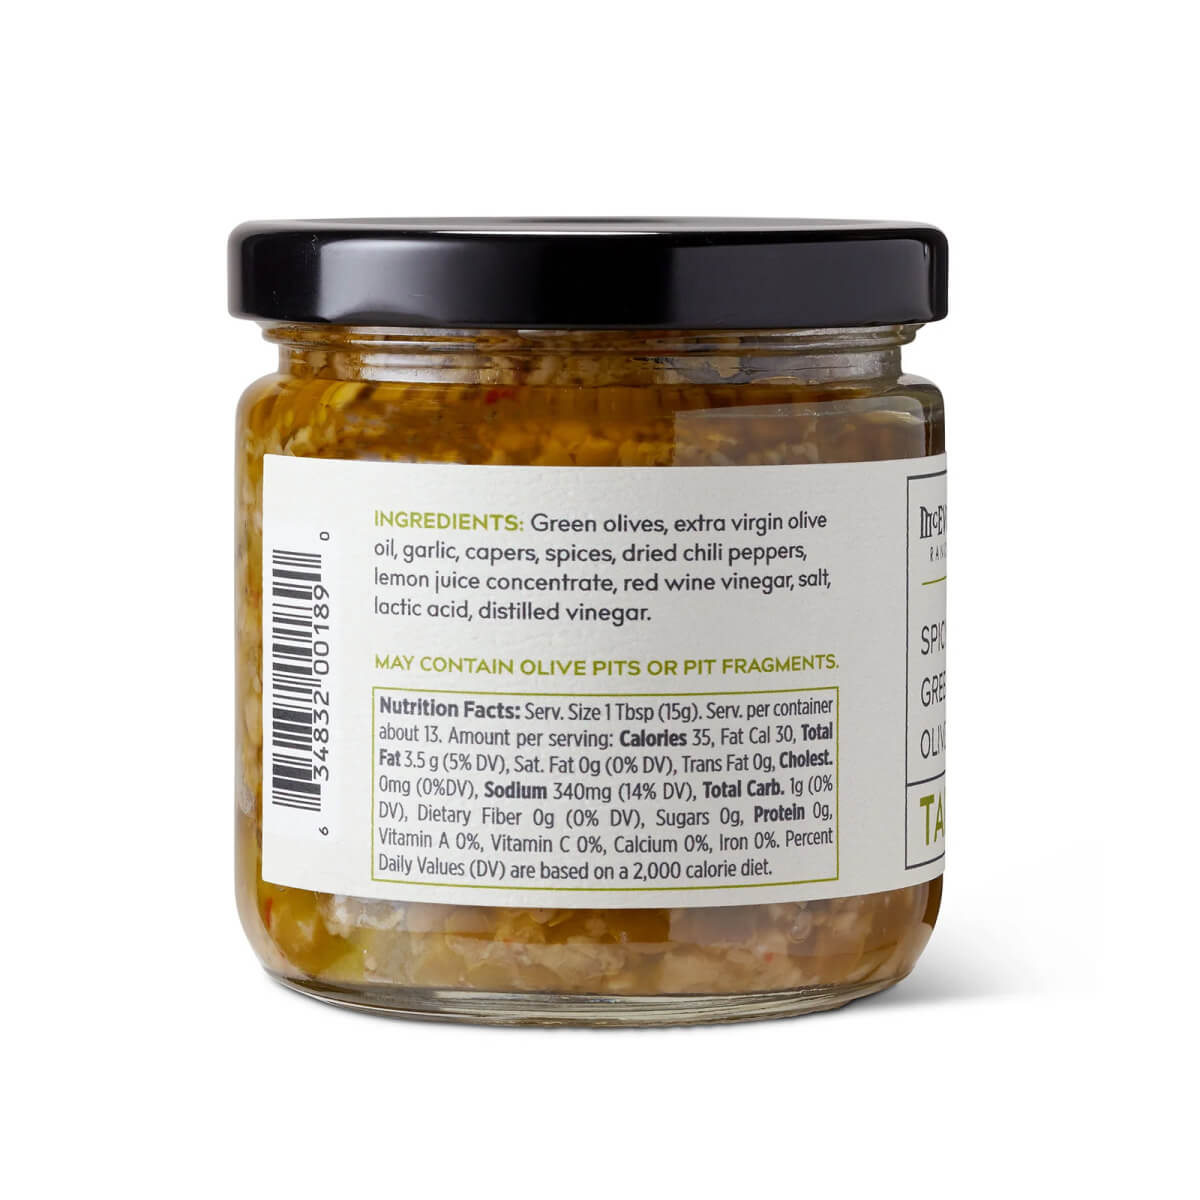 McEvoy Ranch Spicy Green Olive Tapenade